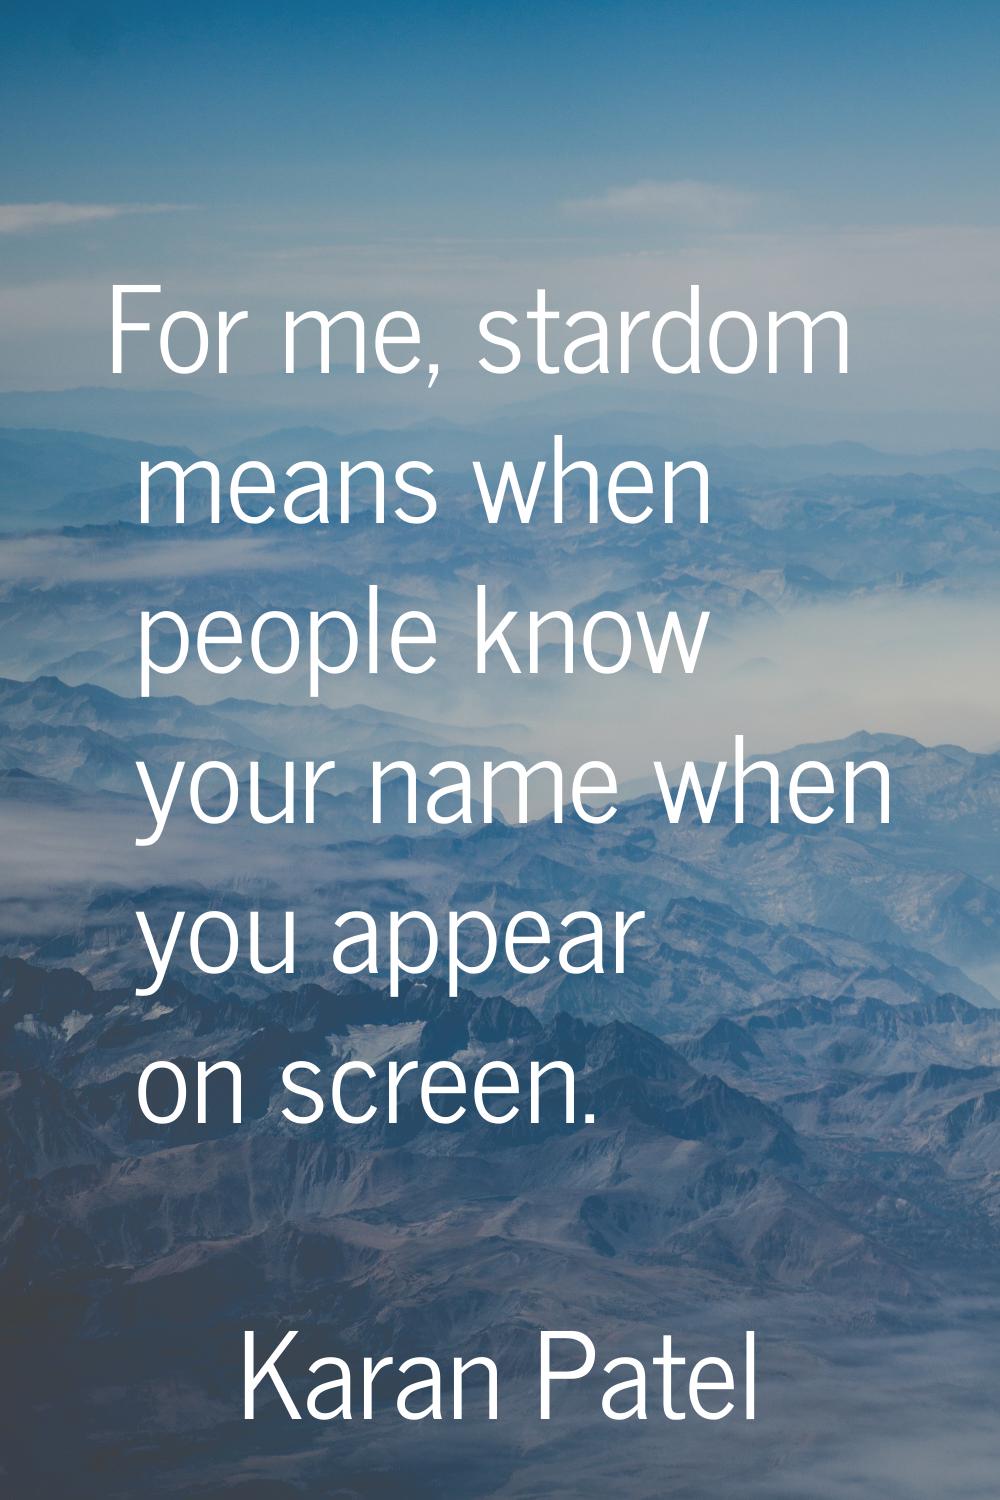 For me, stardom means when people know your name when you appear on screen.